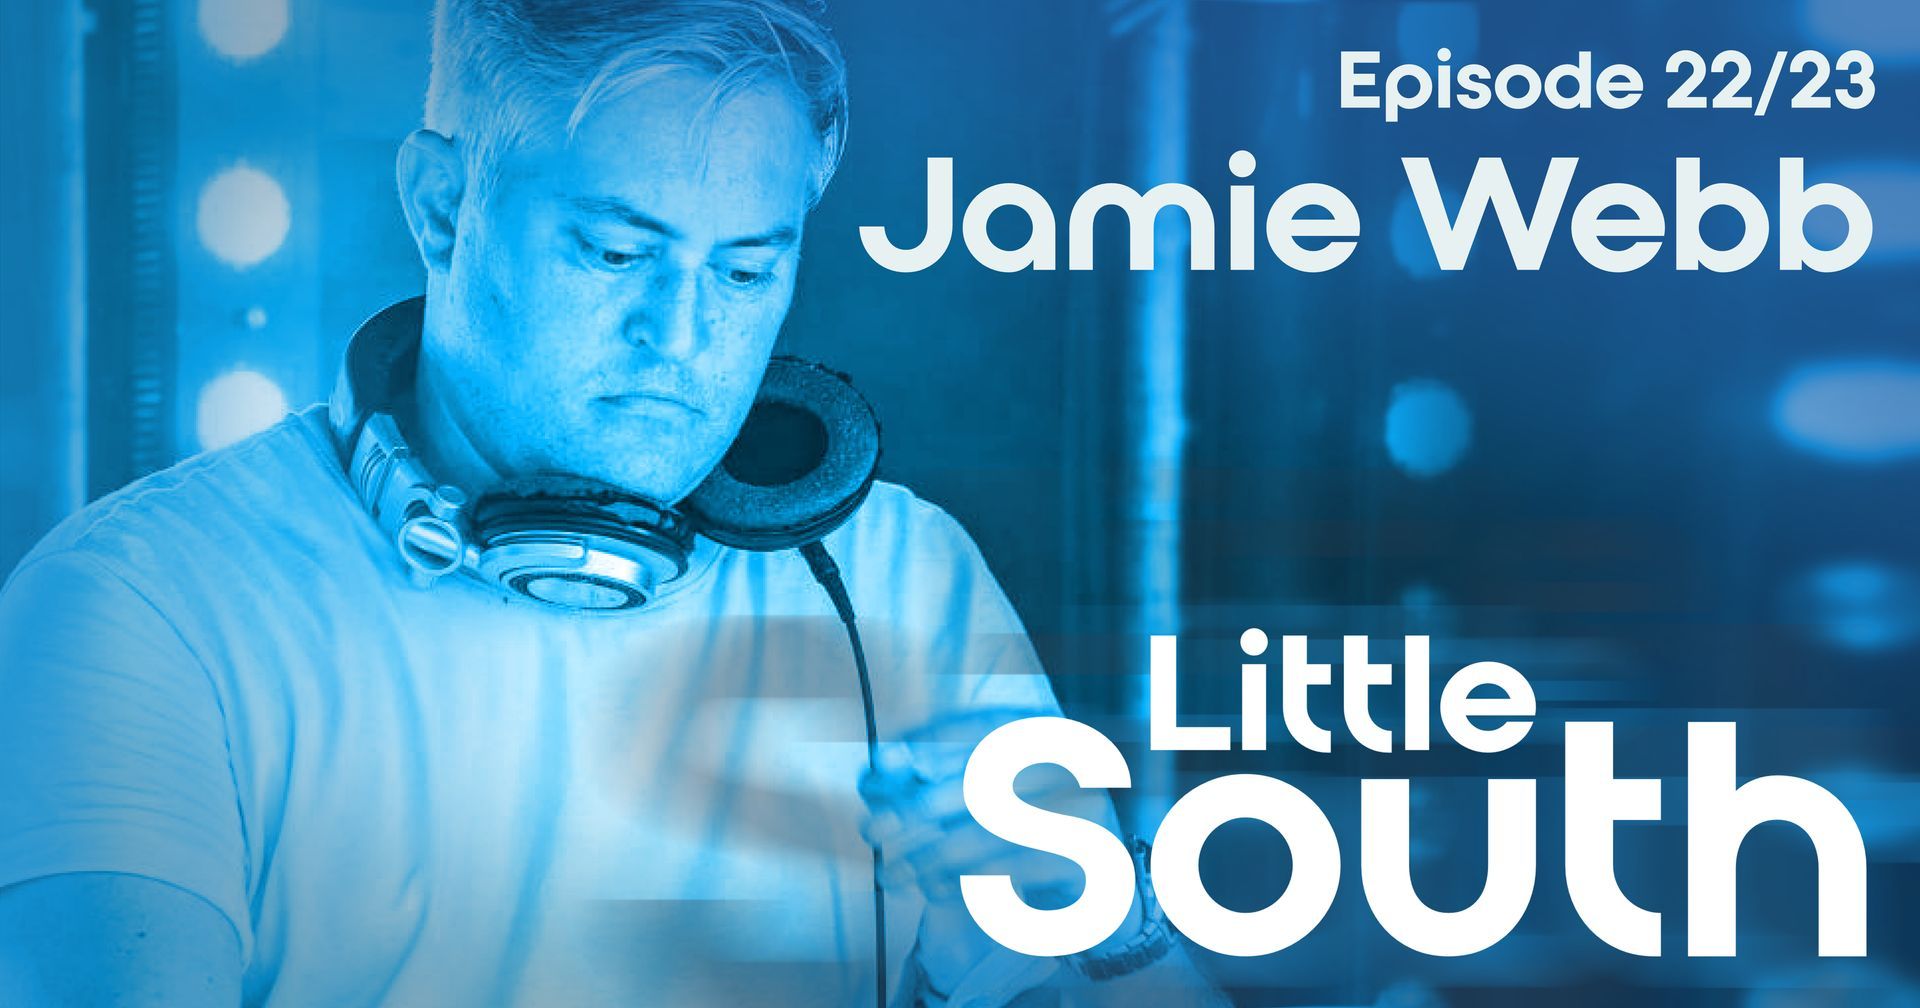 a poster for jamie webb episode 22/23 little south